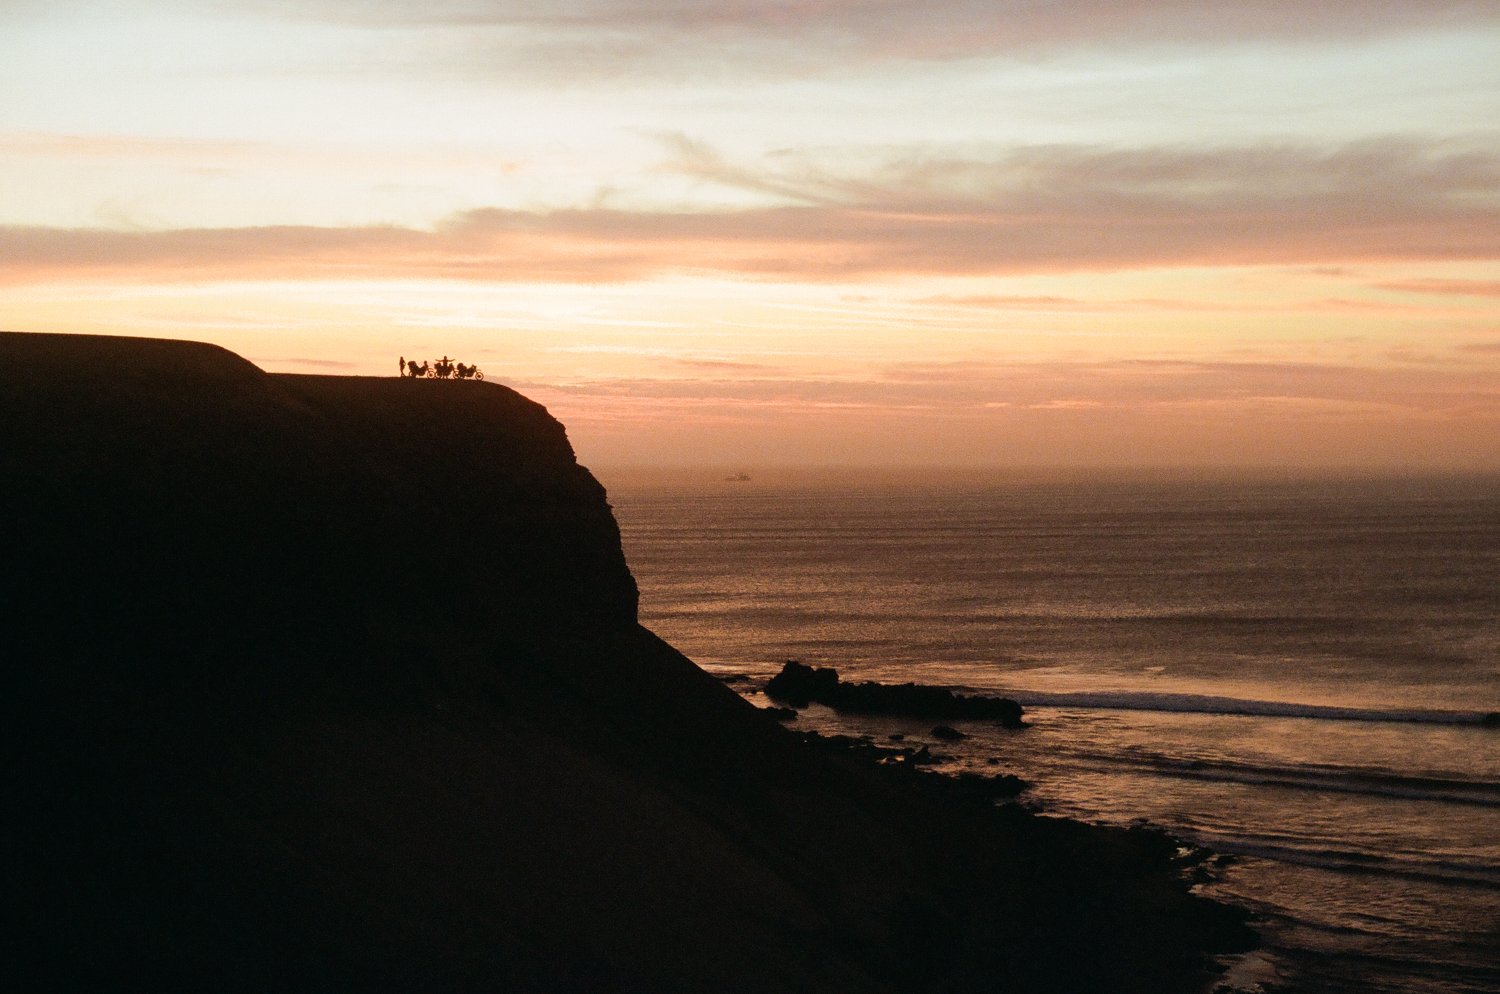  Sunset with three motorcycles and riders on a rock cliff high above the ocean.     